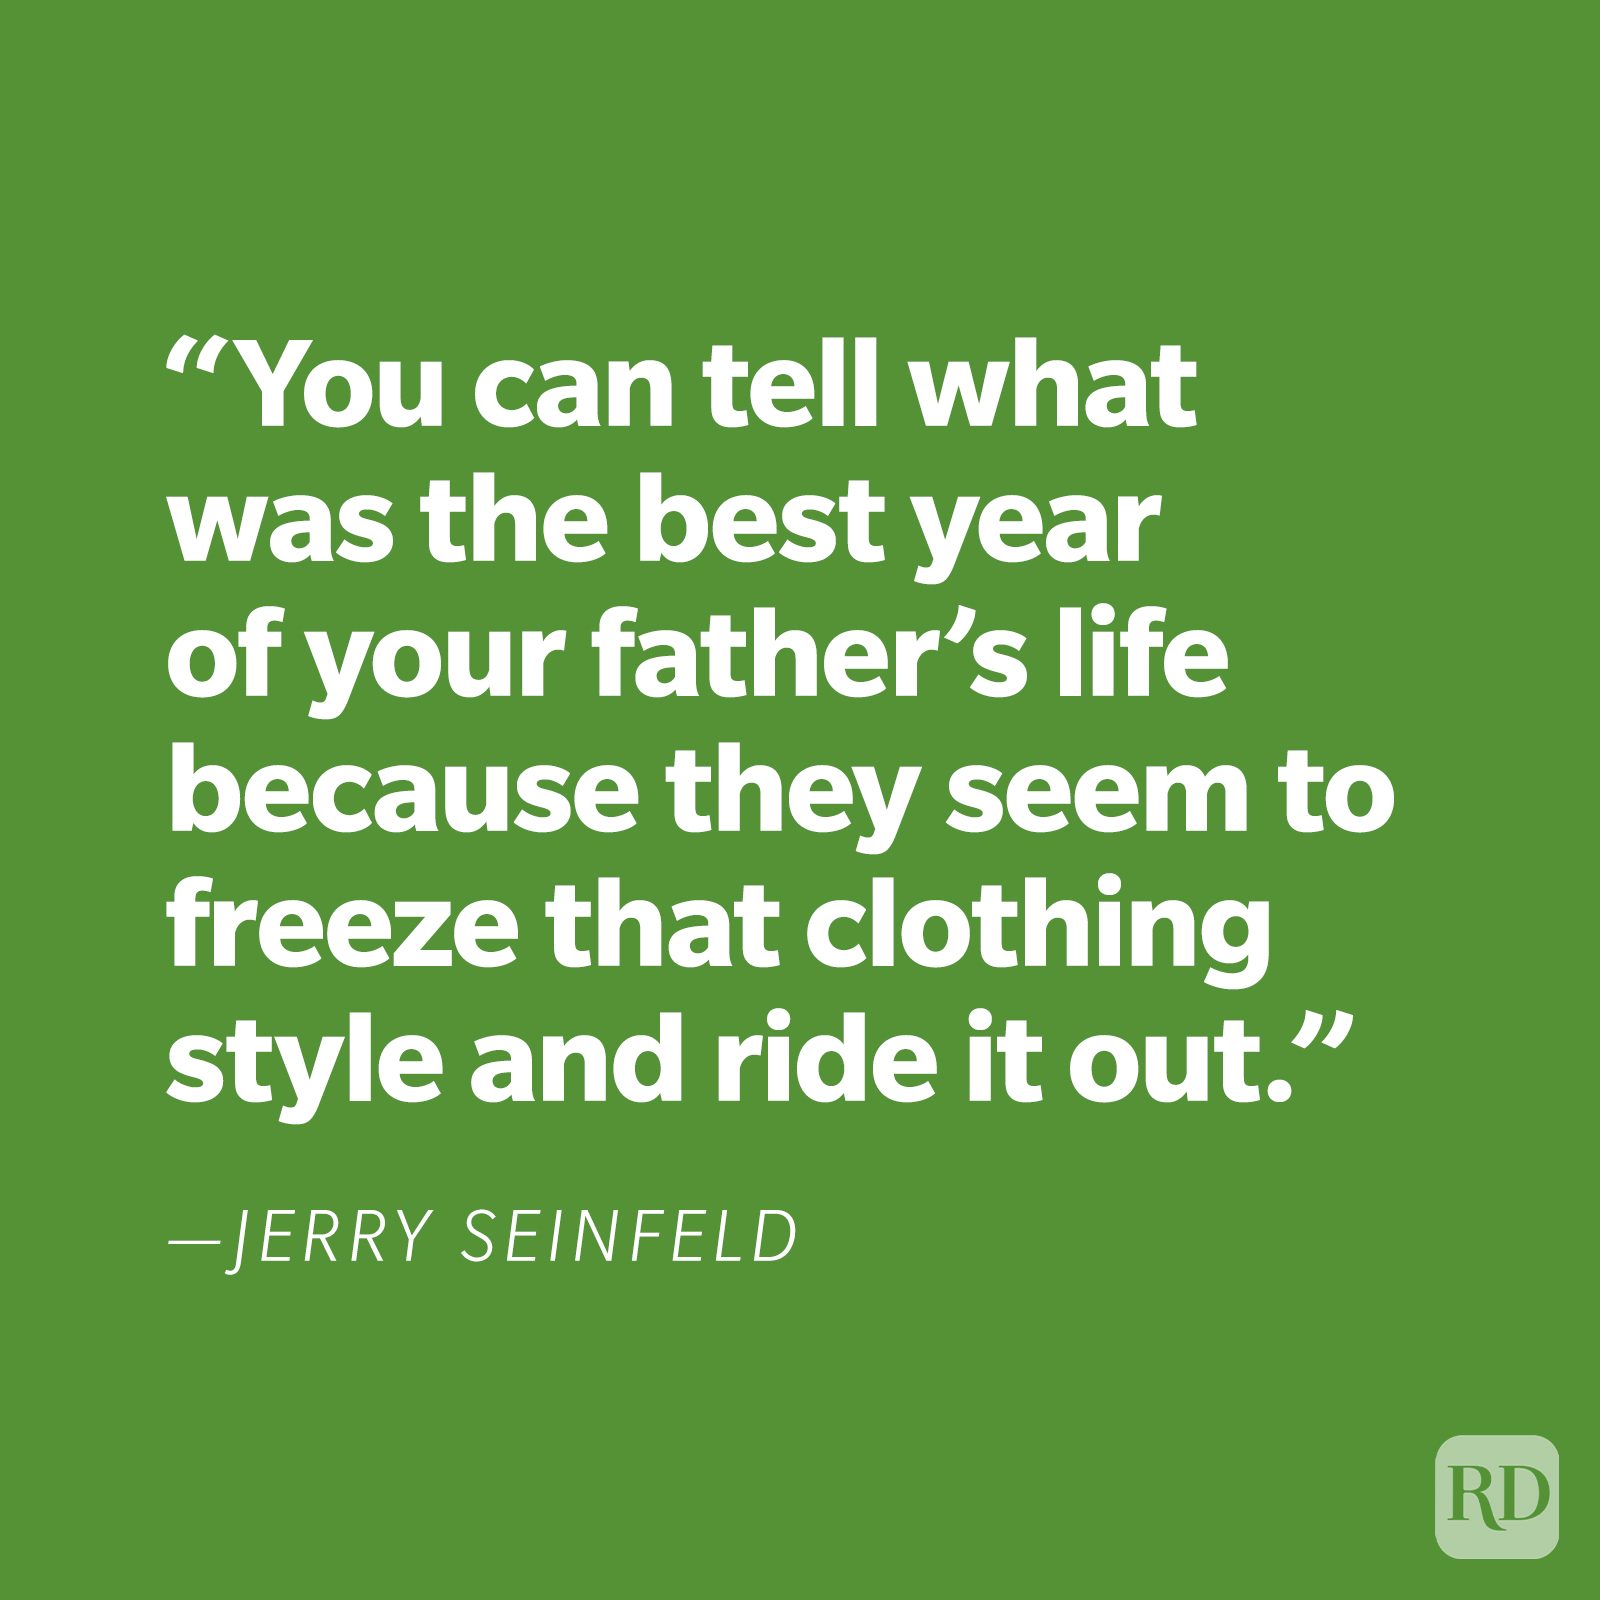 "You can tell what was the best year of your father's life because they seem to freeze that clothing style and ride it out." —Jerry Seinfeld